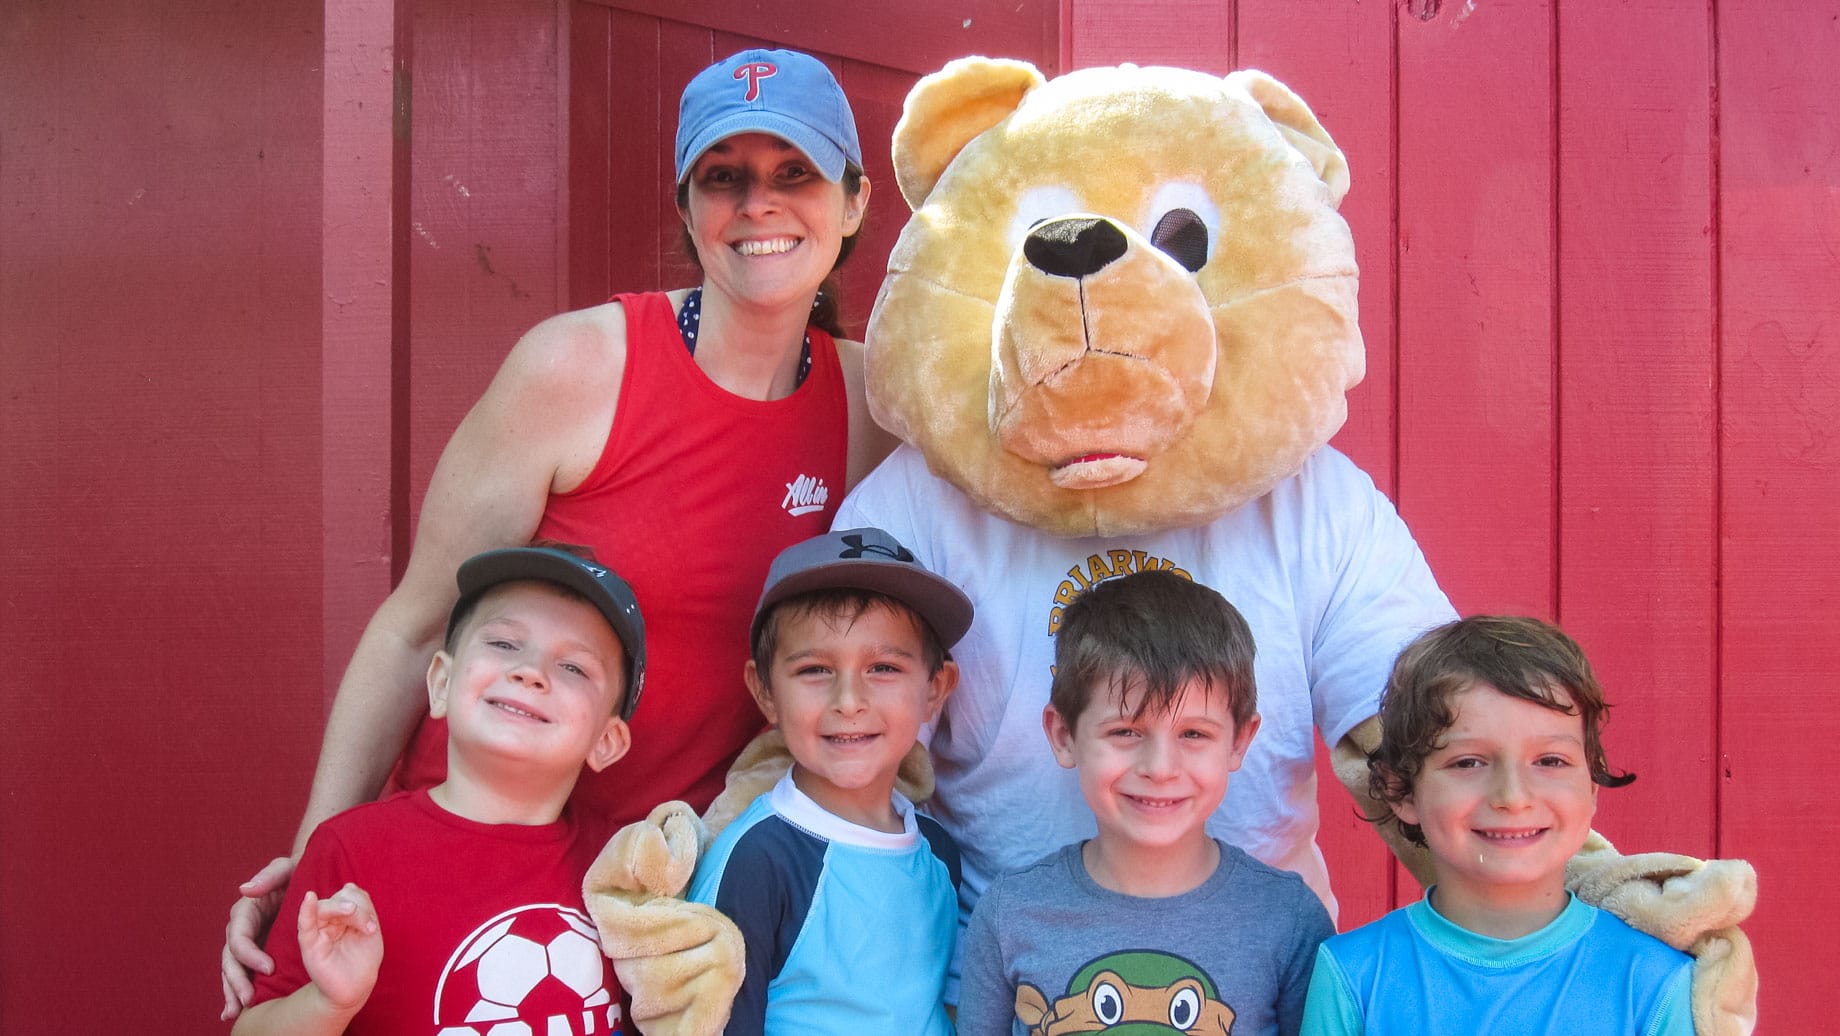 Staff, mascot, and campers smiling